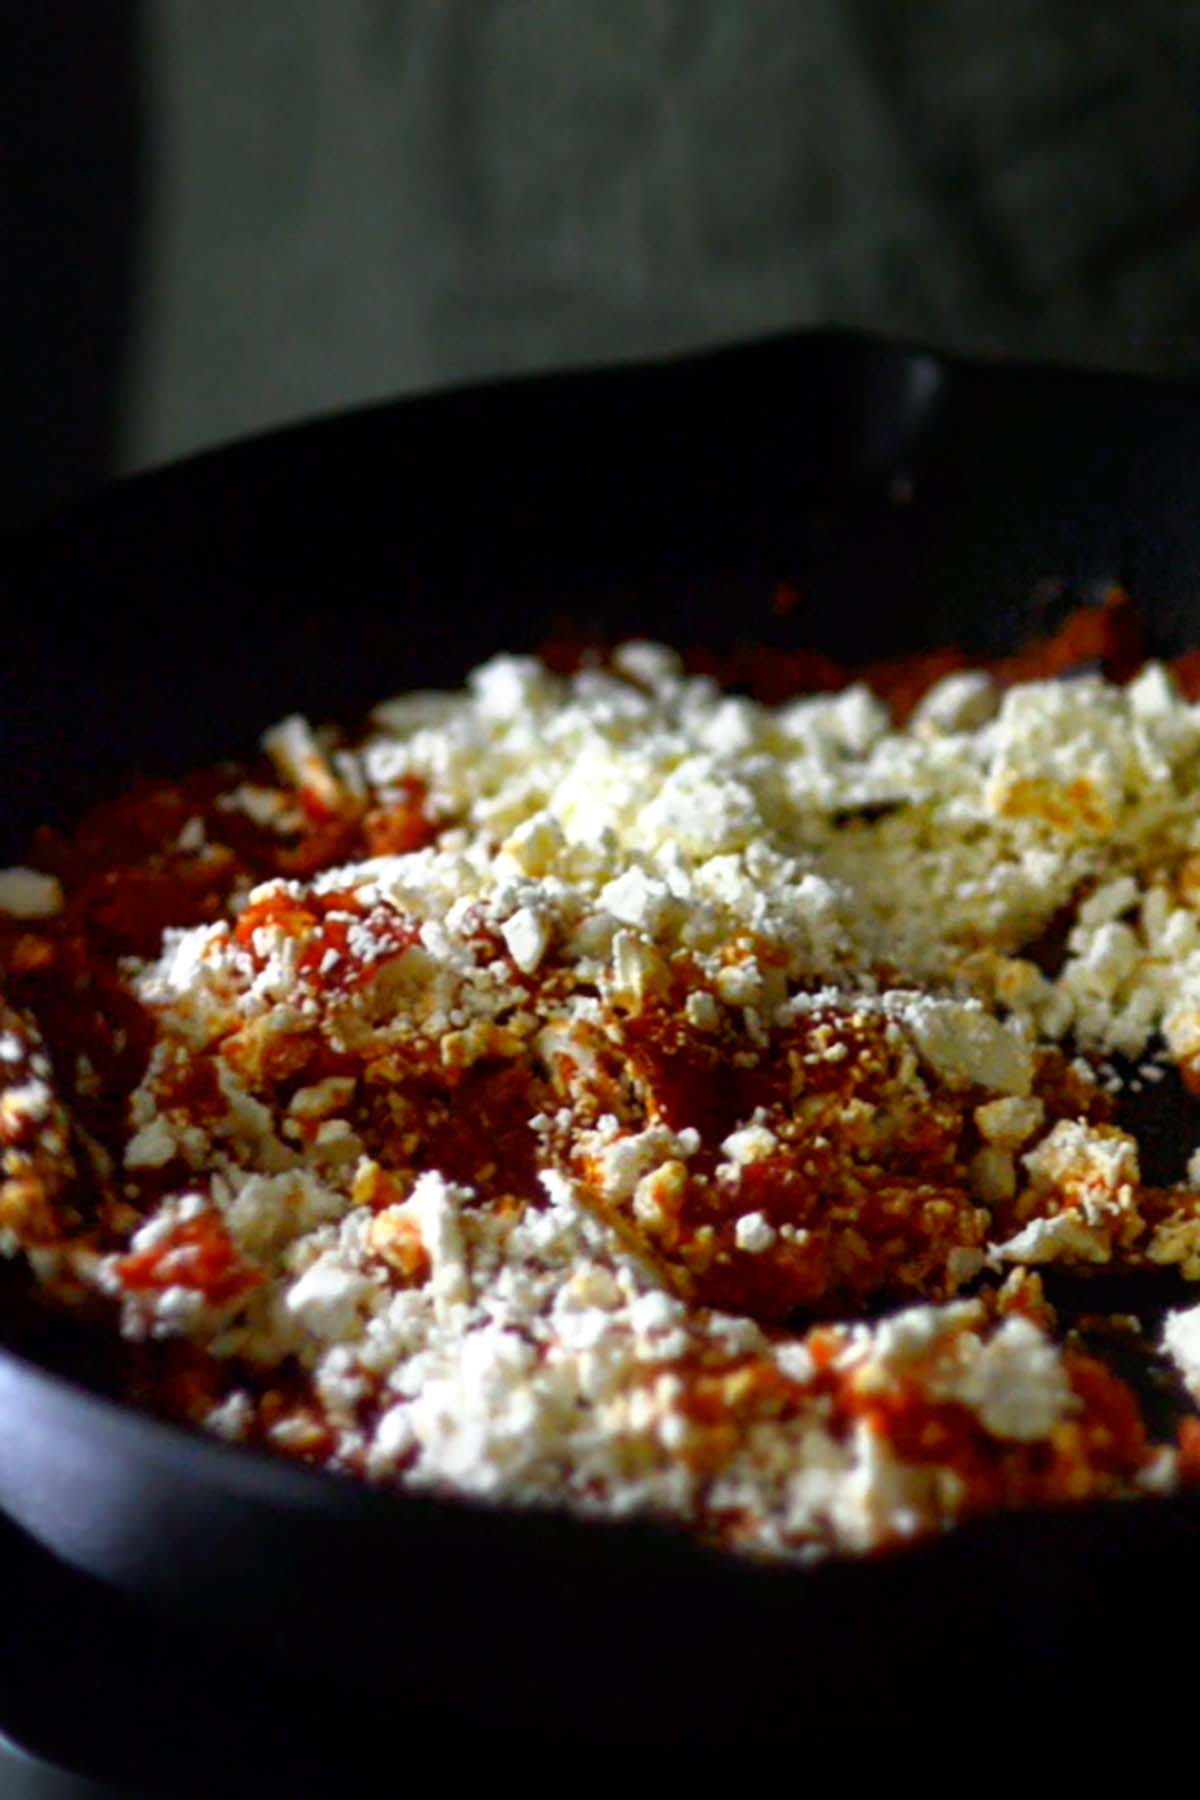 Feta cheese being added to a cast iron skillet with a shakshuka sauce.